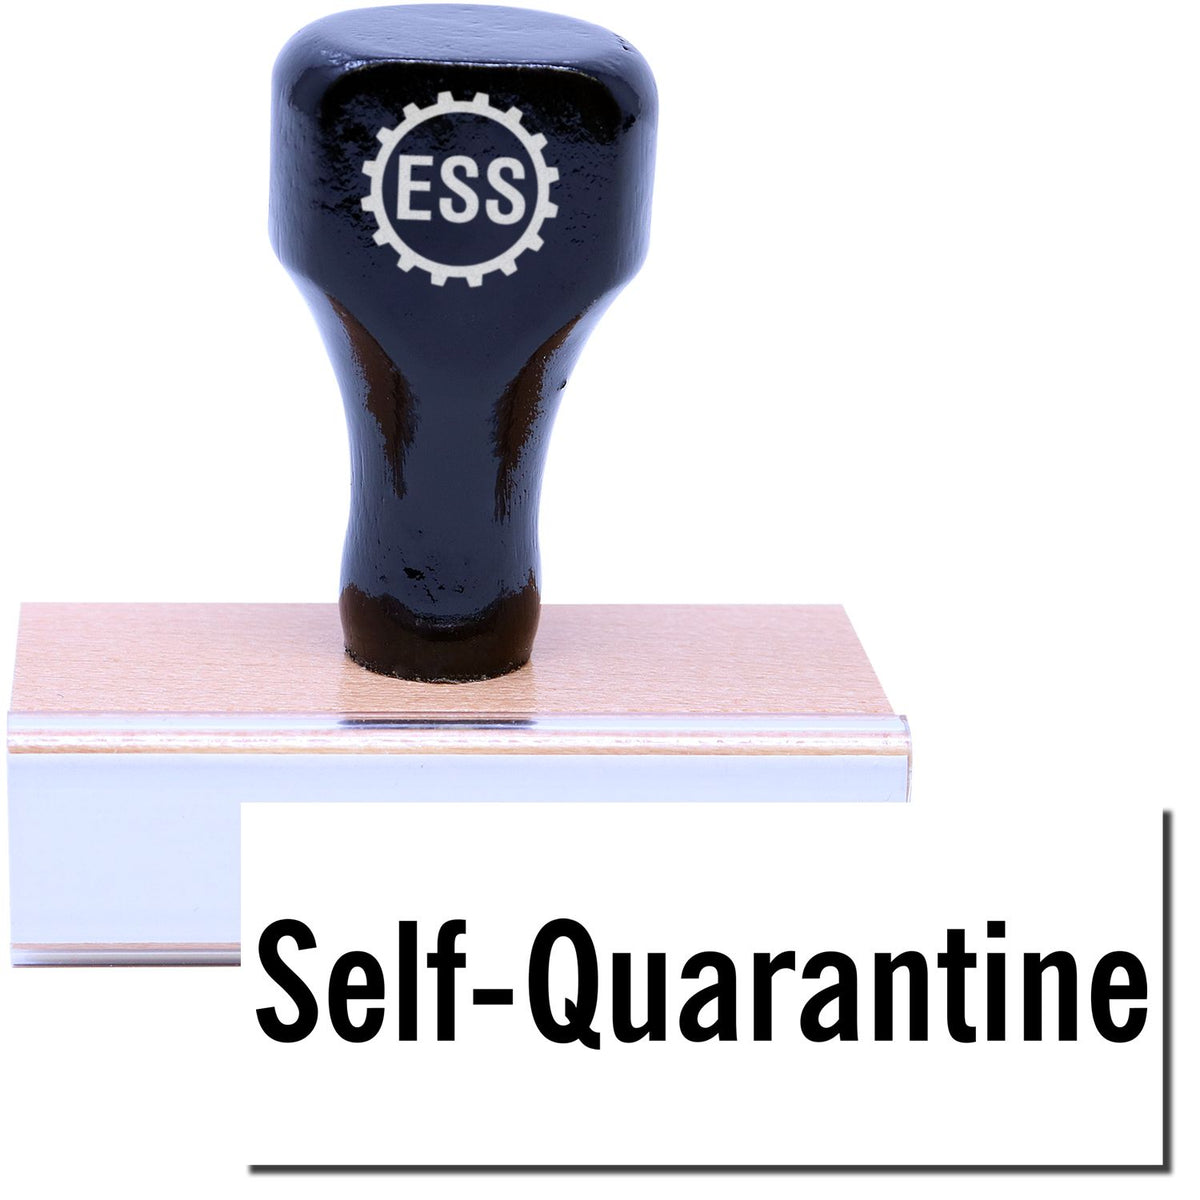 A stock office rubber stamp with a stamped image showing how the text &quot;Self-Quarantine&quot; in a large font is displayed after stamping.